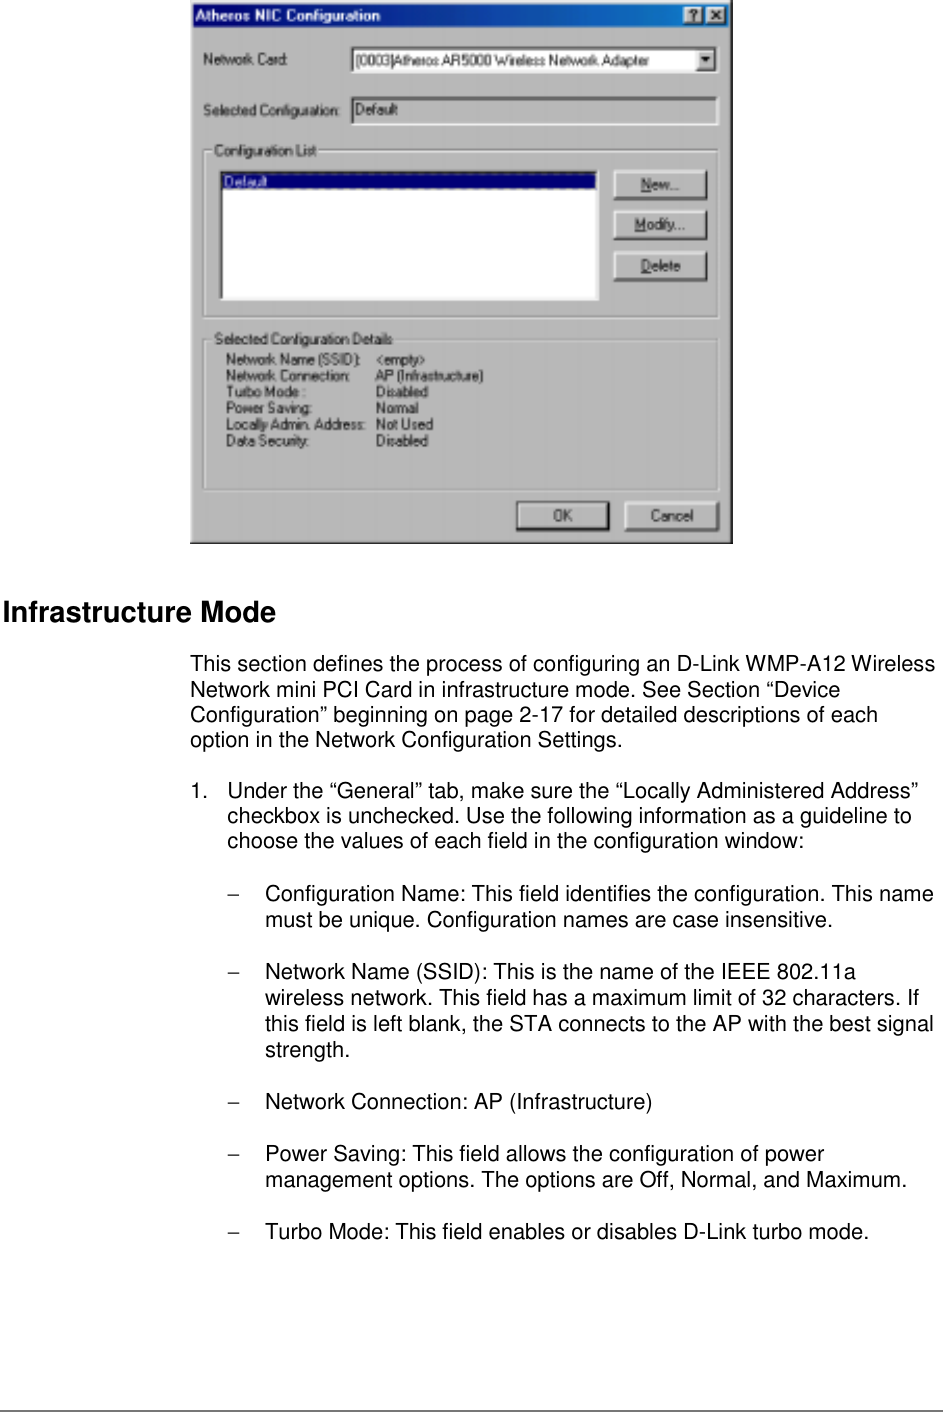 Infrastructure ModeThis section defines the process of configuring an D-Link WMP-A12 WirelessNetwork mini PCI Card in infrastructure mode. See Section “DeviceConfiguration” beginning on page 2-17 for detailed descriptions of eachoption in the Network Configuration Settings.1.  Under the “General” tab, make sure the “Locally Administered Address”checkbox is unchecked. Use the following information as a guideline tochoose the values of each field in the configuration window:−  Configuration Name: This field identifies the configuration. This namemust be unique. Configuration names are case insensitive.−  Network Name (SSID): This is the name of the IEEE 802.11awireless network. This field has a maximum limit of 32 characters. Ifthis field is left blank, the STA connects to the AP with the best signalstrength.−  Network Connection: AP (Infrastructure)−  Power Saving: This field allows the configuration of powermanagement options. The options are Off, Normal, and Maximum.−  Turbo Mode: This field enables or disables D-Link turbo mode.